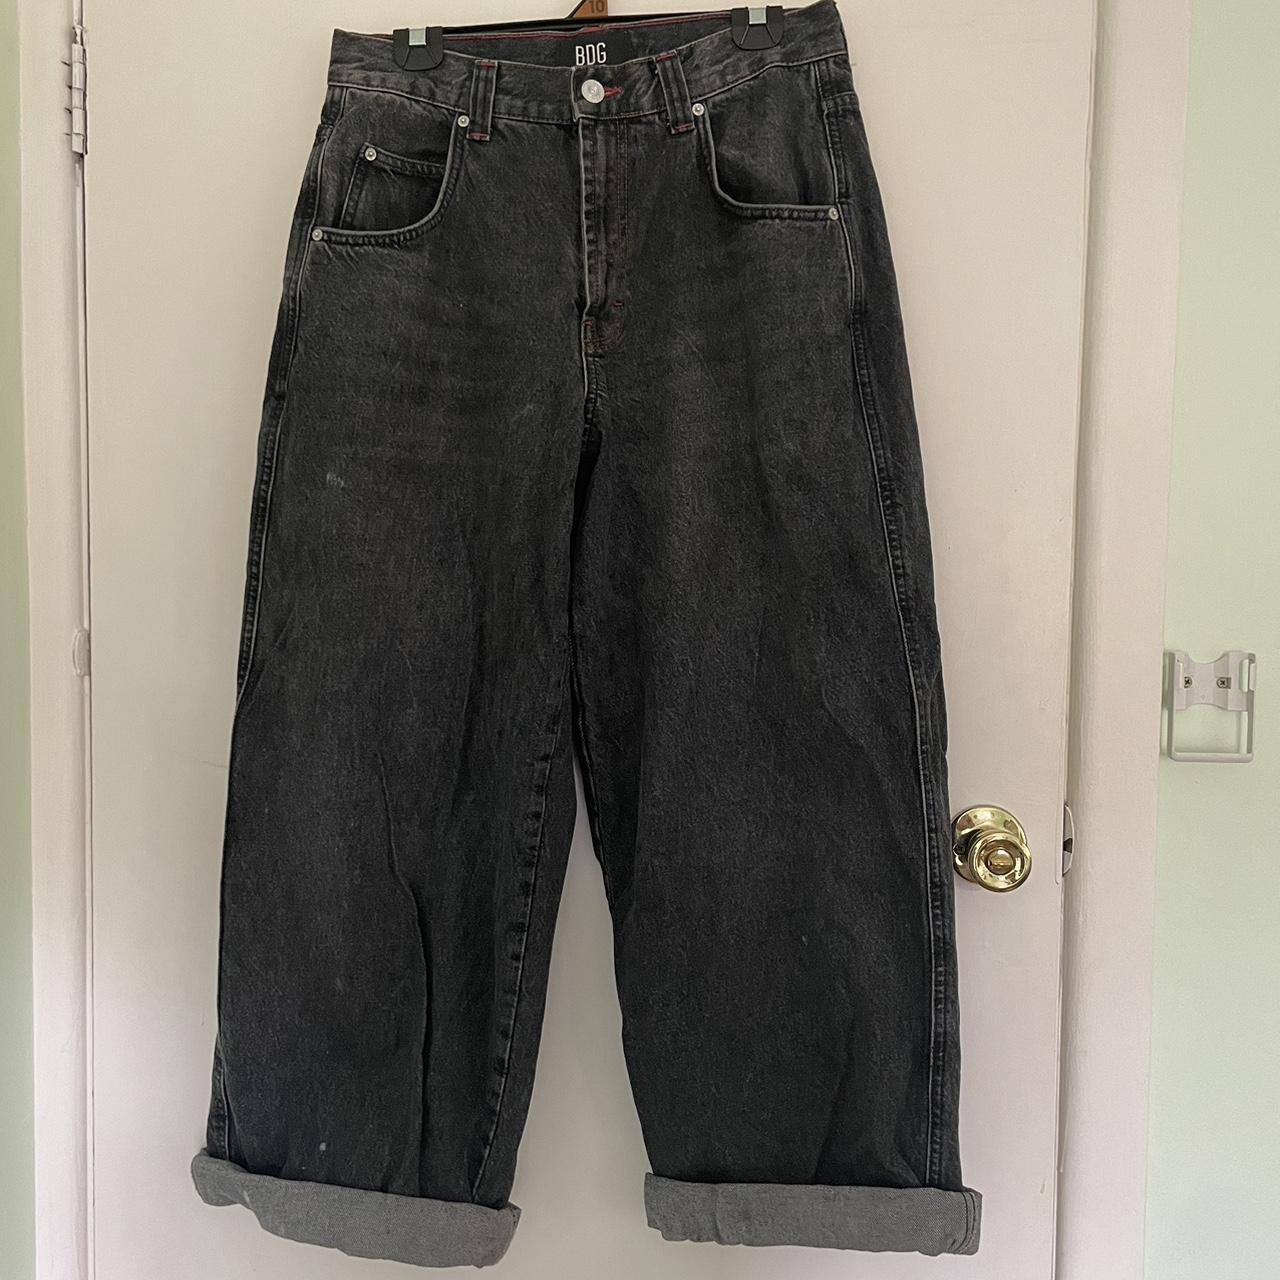 Urban outfitters BDG wide fit jeans 30W 32L... - Depop